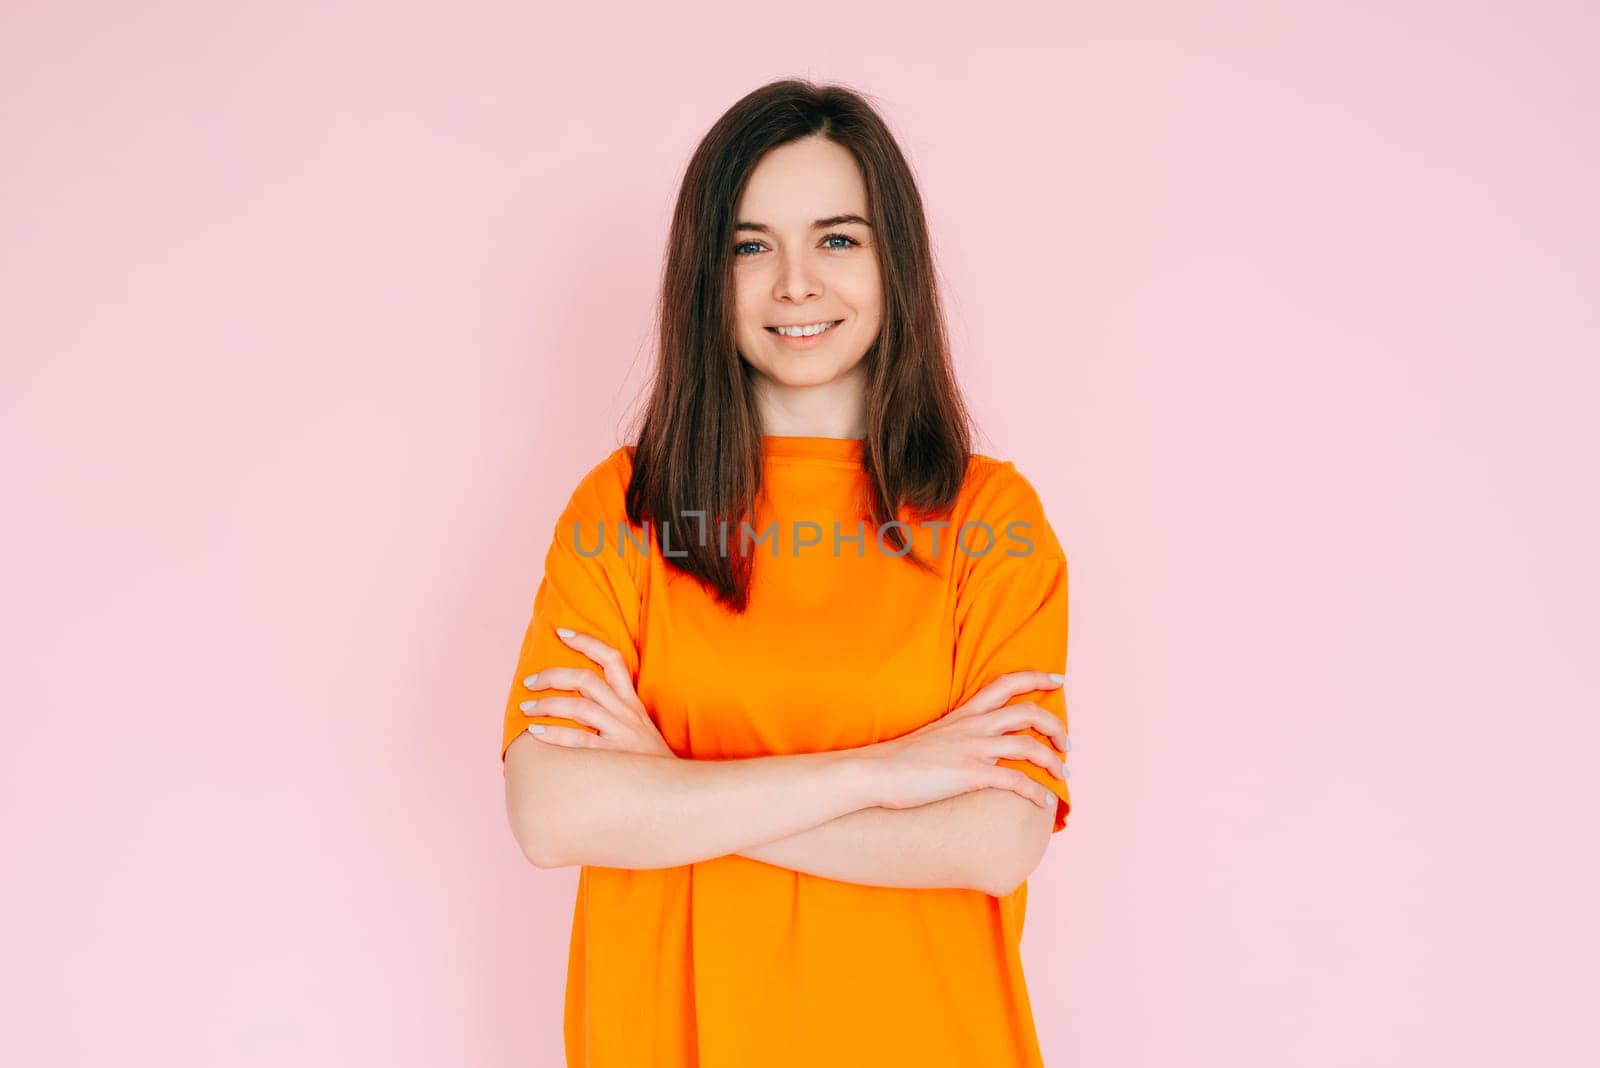 Radiant Joy: Beautiful Woman with Beaming Smile and Arms Crossed, Embracing Good Mood in Comfortable Attire - Vibrant Positivity on Pink Background.